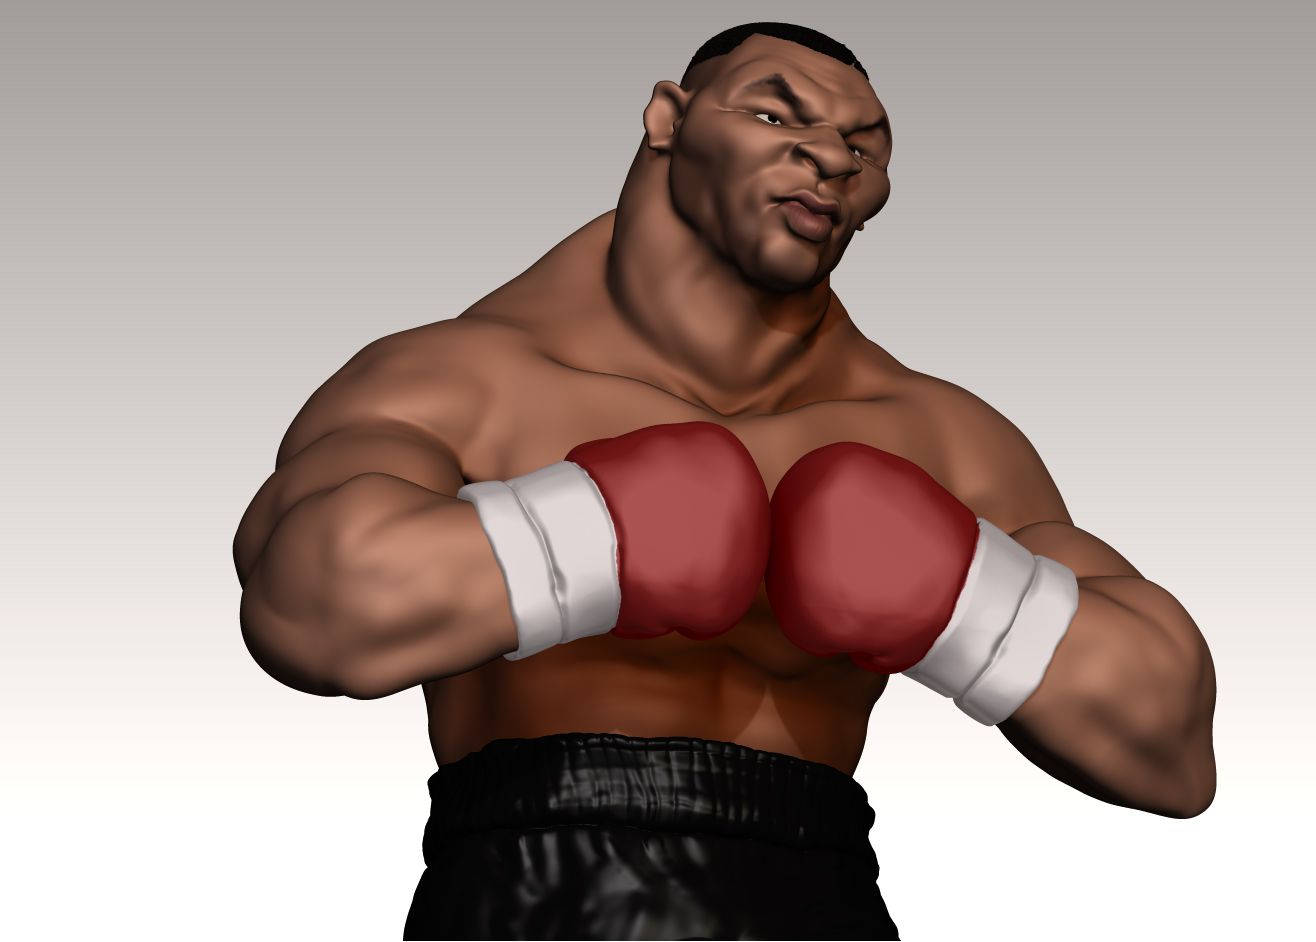 Mike Tyson Wallpapers HD 64 images